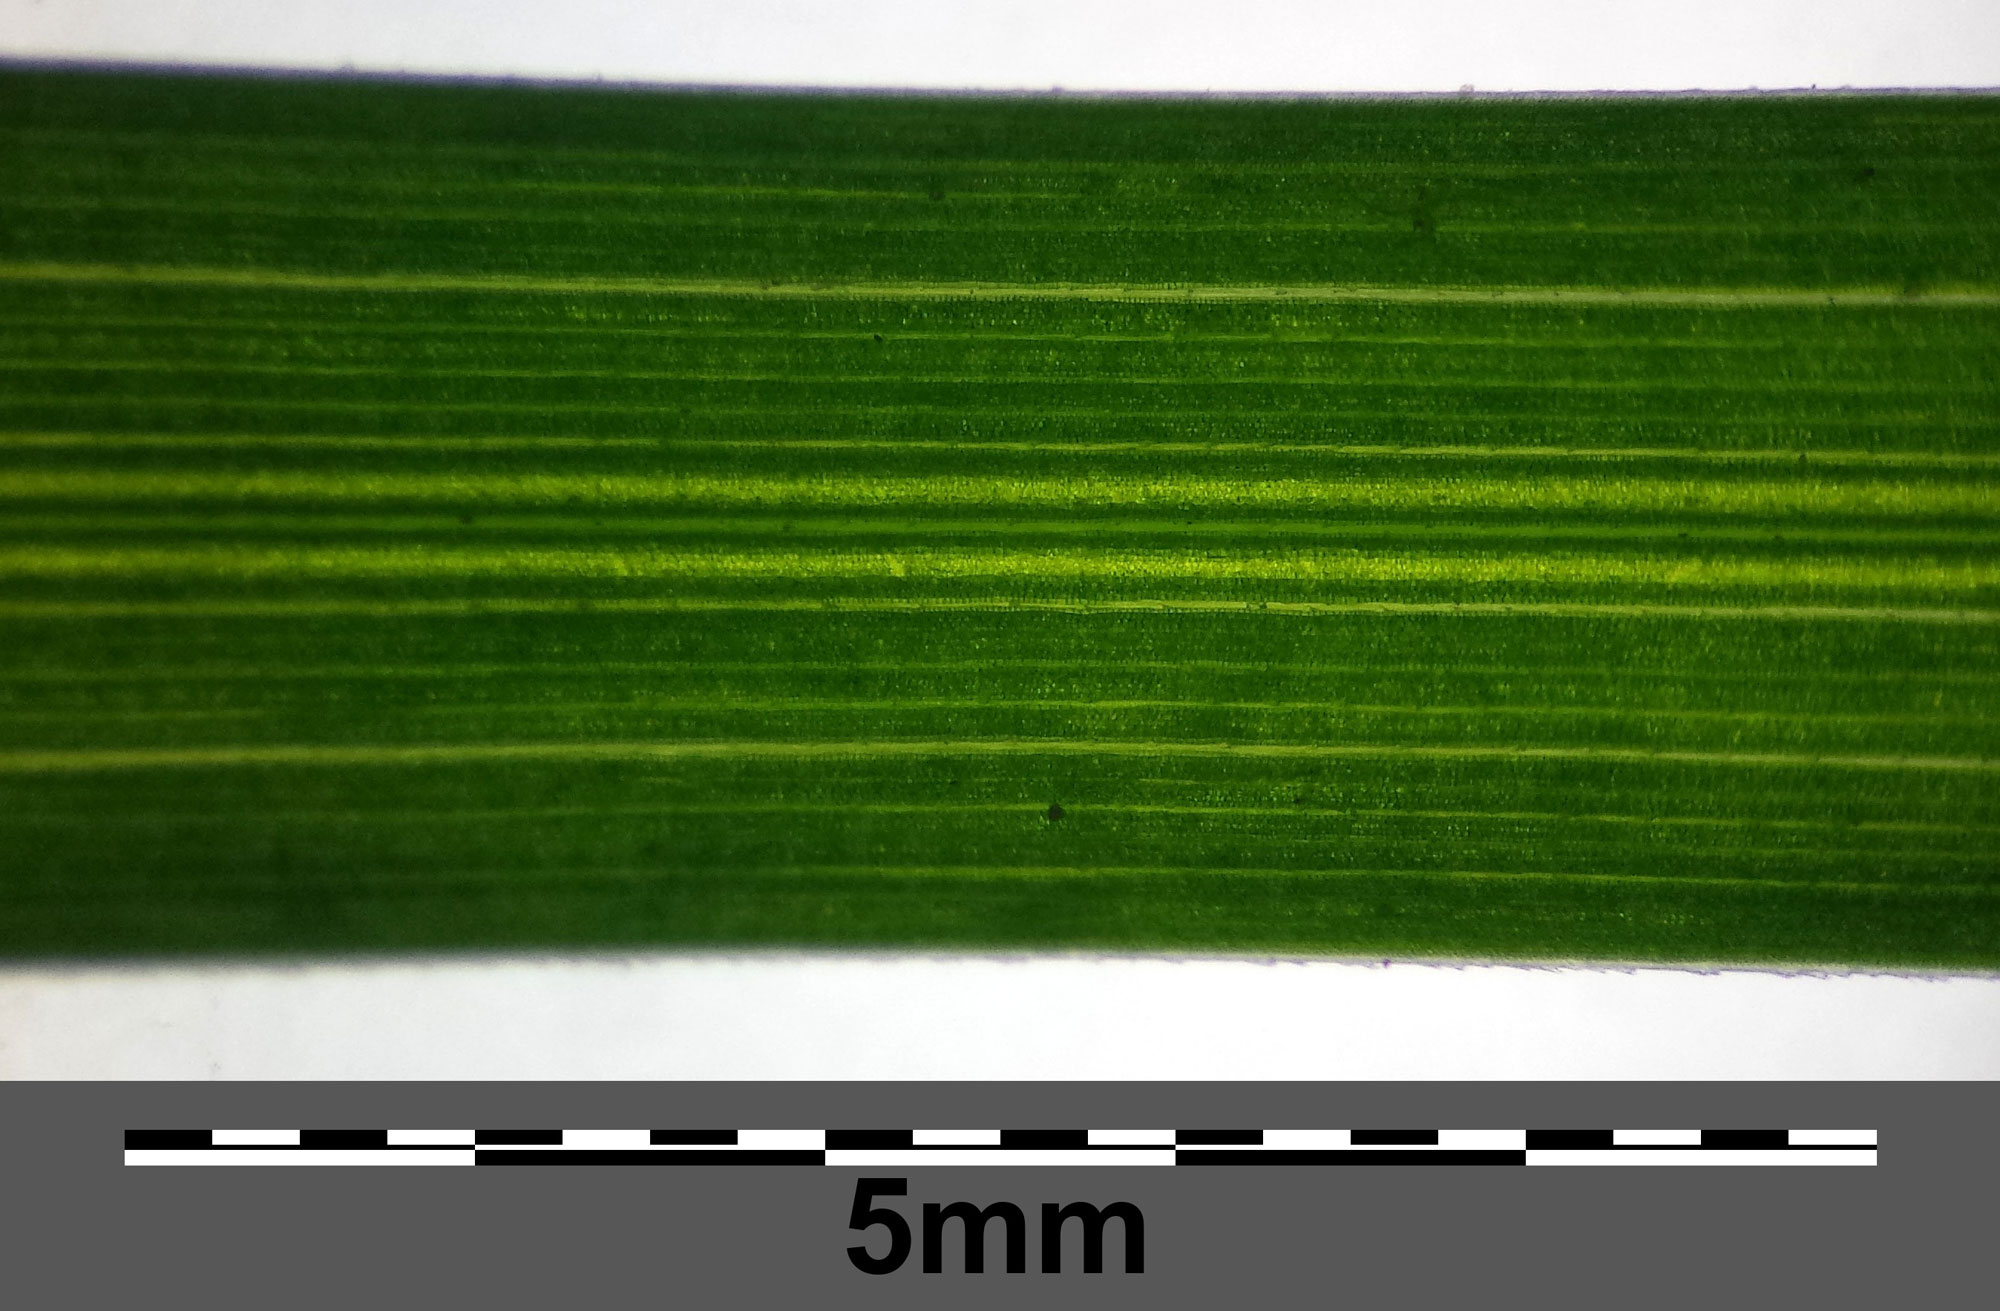 Photograph of a portion of a wood bluegrass leaf showing the double midvein and additional parallel major veins. The leaf is oriented horizontally, scale bar is 5 millimeters.